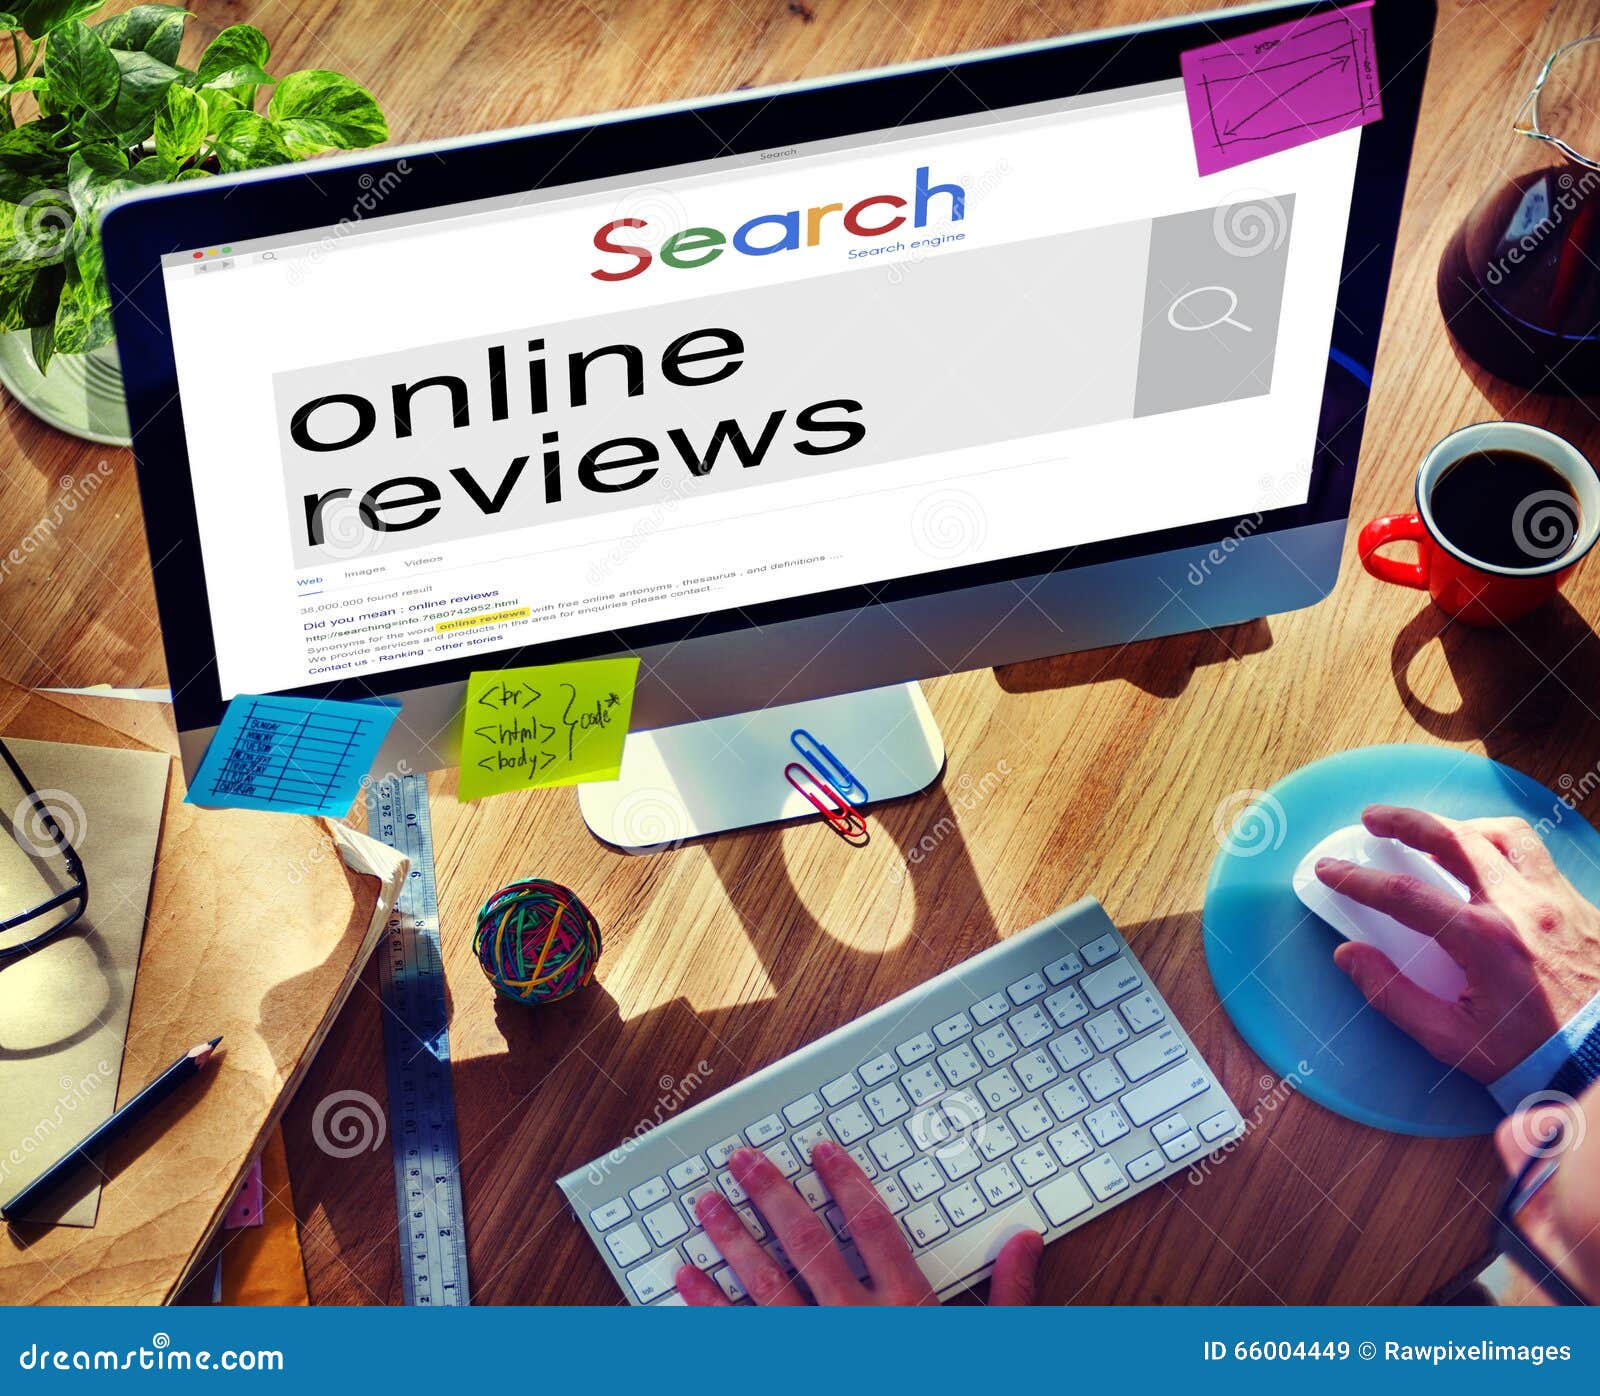 online reviews feedback comment suggestion concept